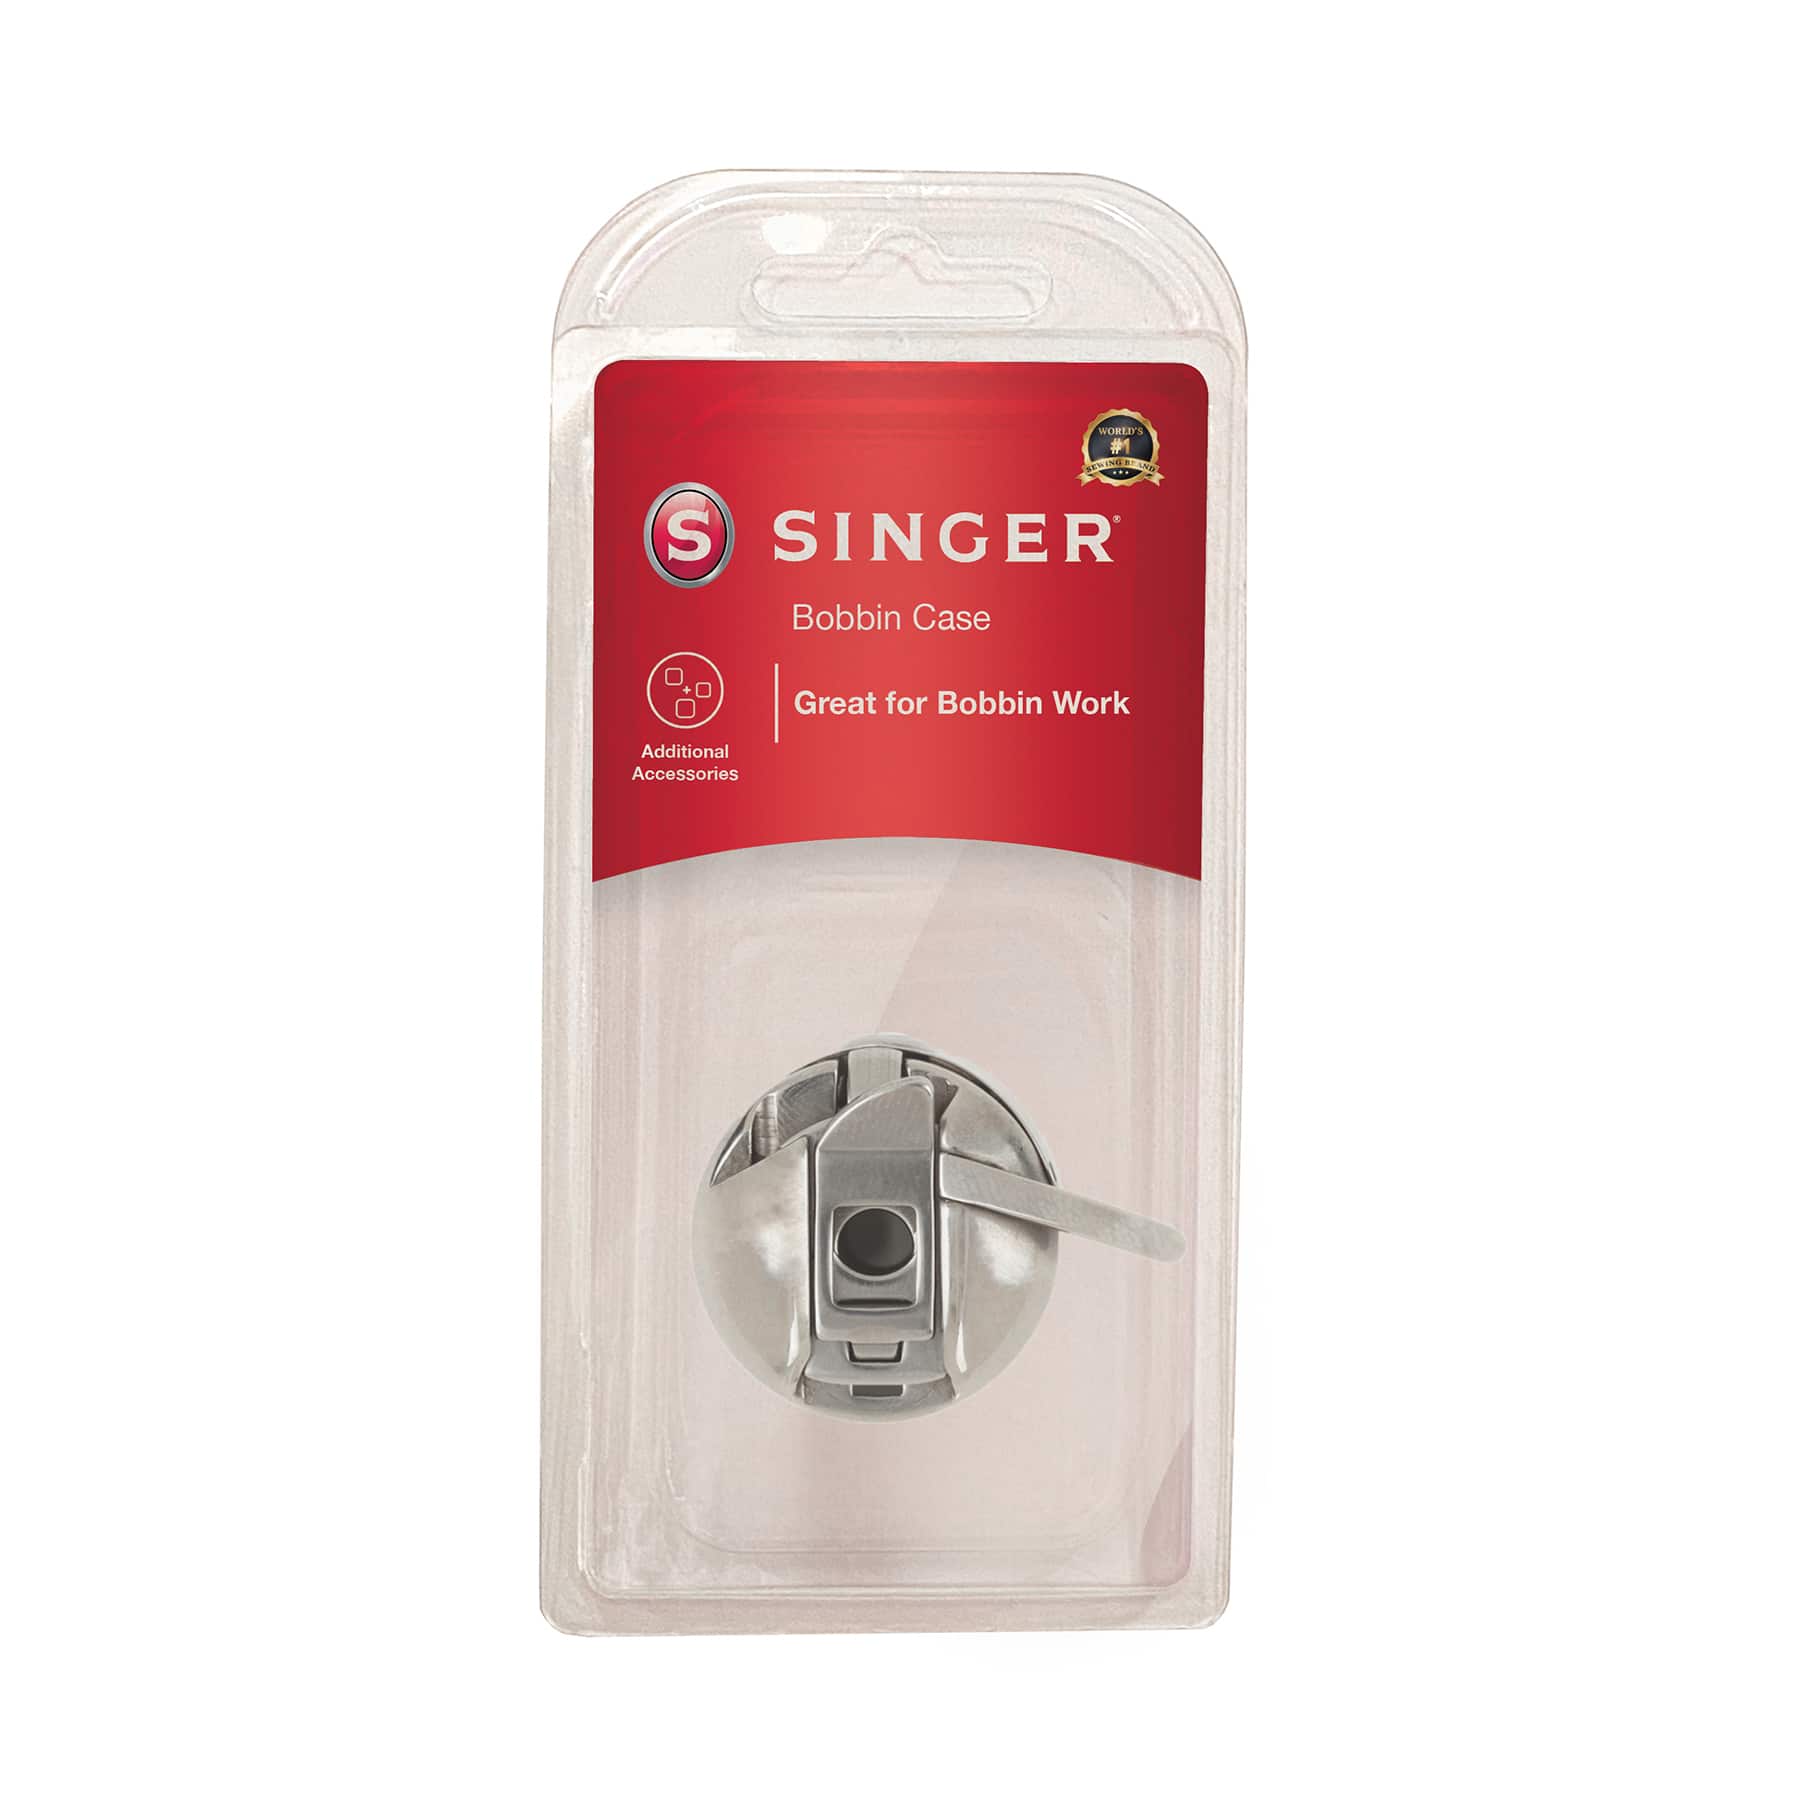 Singer Bobbin Case for Sewing Machines with Class 15 Front-Loading Bobbin